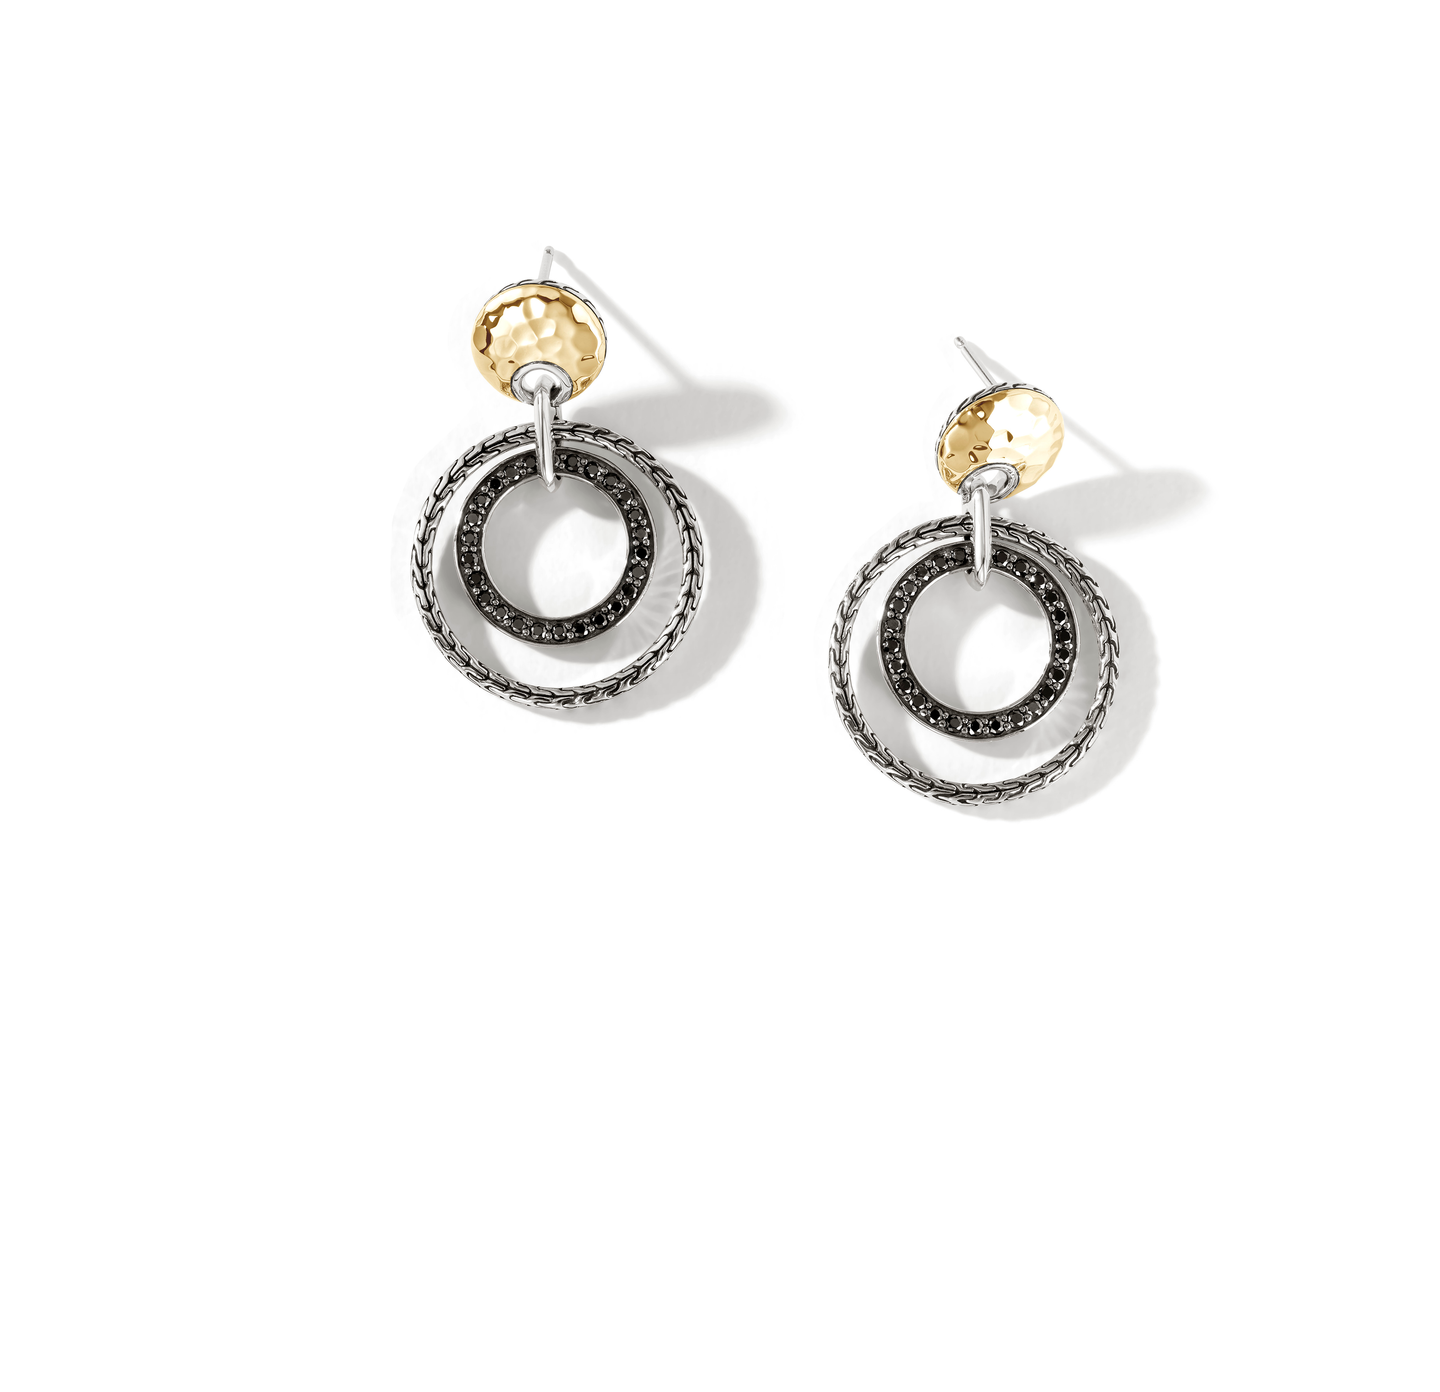 John Hardy Hammered Yellow Gold & Silver Earrings